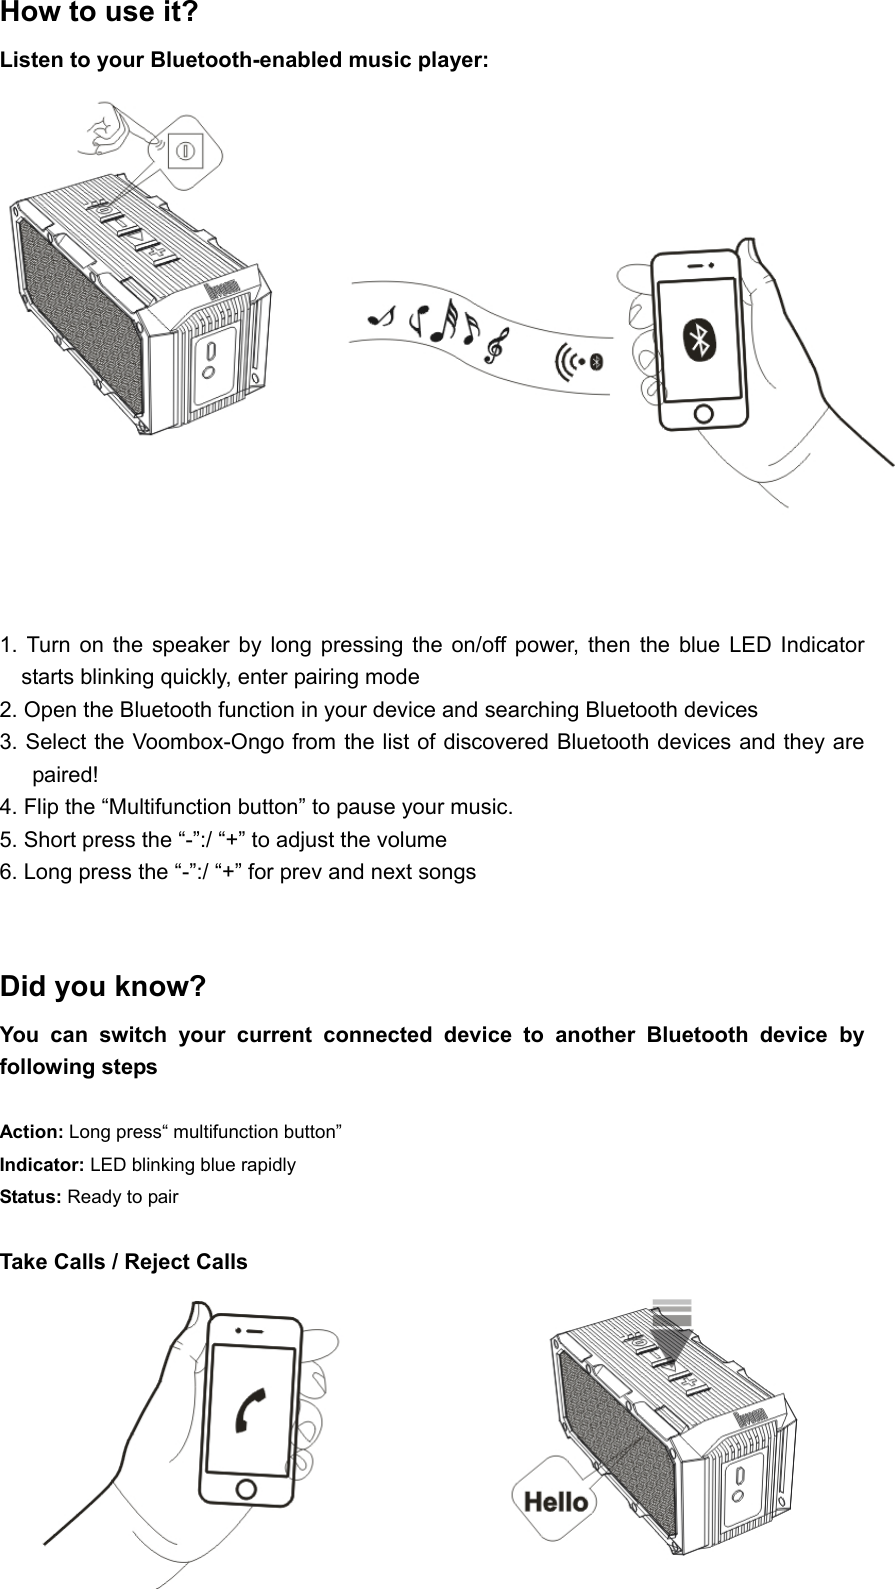  How to use it? Listen to your Bluetooth-enabled music player:     1.  Turn  on  the  speaker  by  long  pressing  the  on/off  power,  then  the  blue  LED  Indicator starts blinking quickly, enter pairing mode 2. Open the Bluetooth function in your device and searching Bluetooth devices   3. Select the Voombox-Ongo from the list of discovered Bluetooth devices and they are paired!    4. Flip the “Multifunction button” to pause your music. 5. Short press the “-”:/ “+” to adjust the volume 6. Long press the “-”:/ “+” for prev and next songs     Did you know?   You  can  switch  your  current  connected  device  to  another  Bluetooth  device  by following steps  Action: Long press“ multifunction button”   Indicator: LED blinking blue rapidly Status: Ready to pair    Take Calls / Reject Calls    